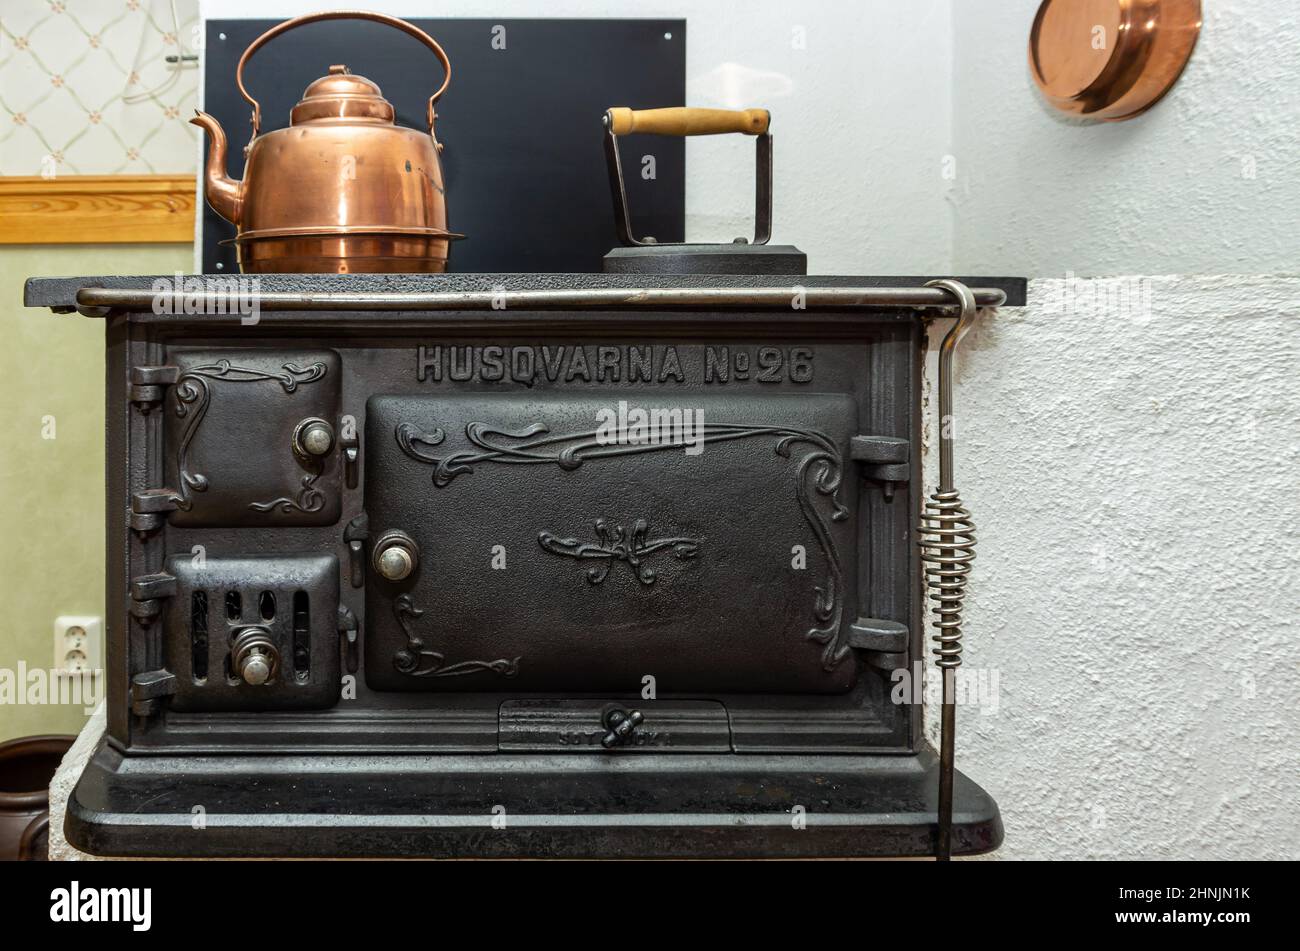 https://c8.alamy.com/comp/2HNJN1K/antique-kitchen-and-household-utensils-some-made-of-copper-were-placed-for-decoration-on-a-traditional-kitchen-cooker-with-wood-or-coal-firing-2HNJN1K.jpg